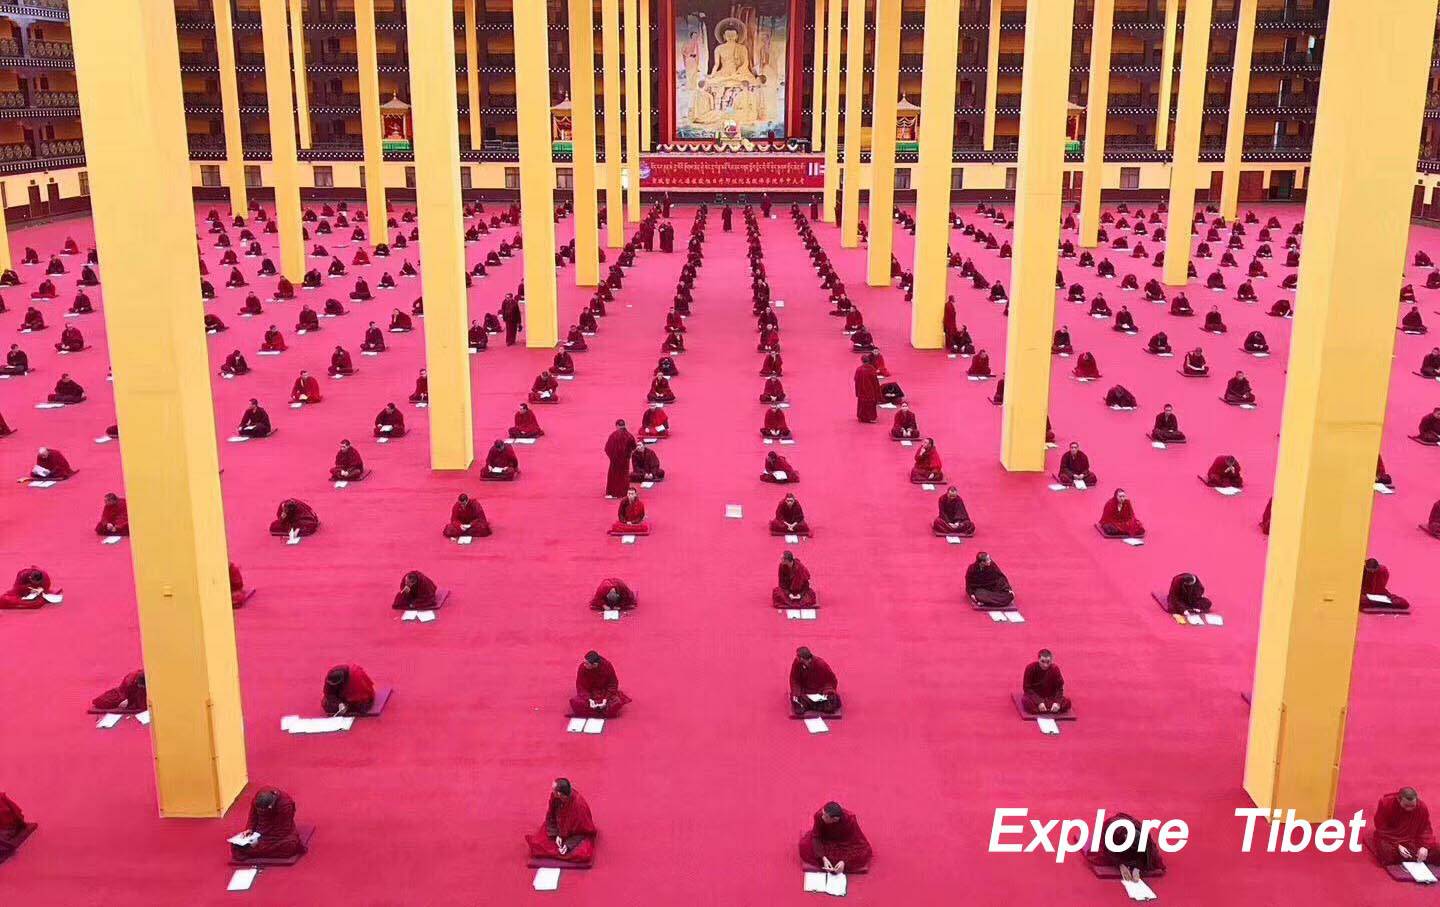 Final exams for the monks -Explore Tibet